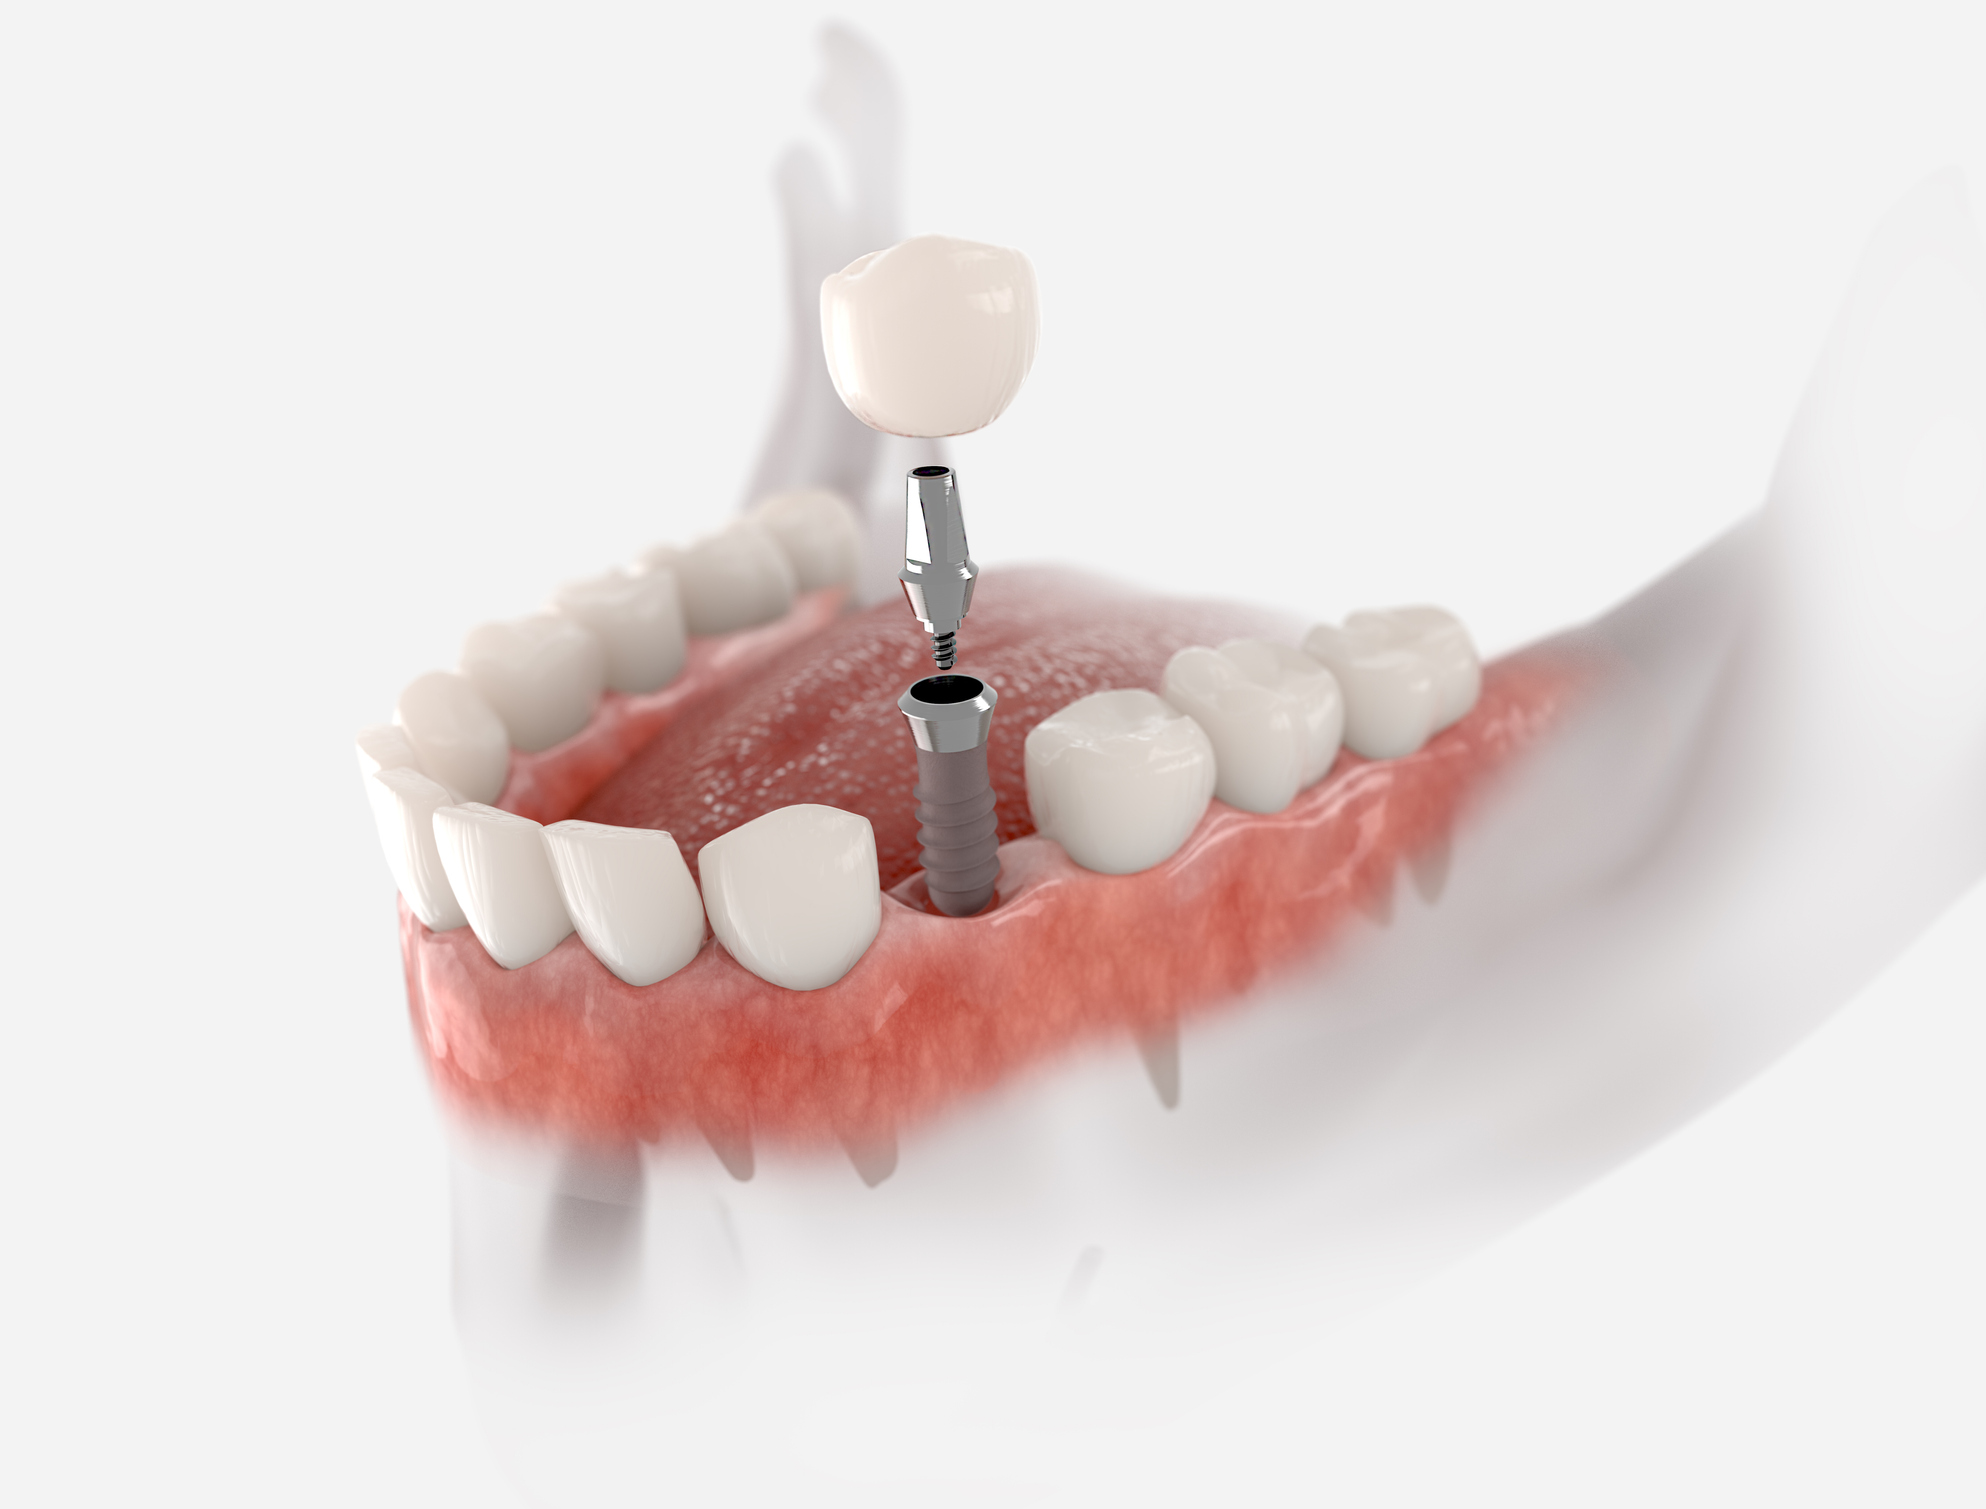 5 Common Myths About Dental Implants